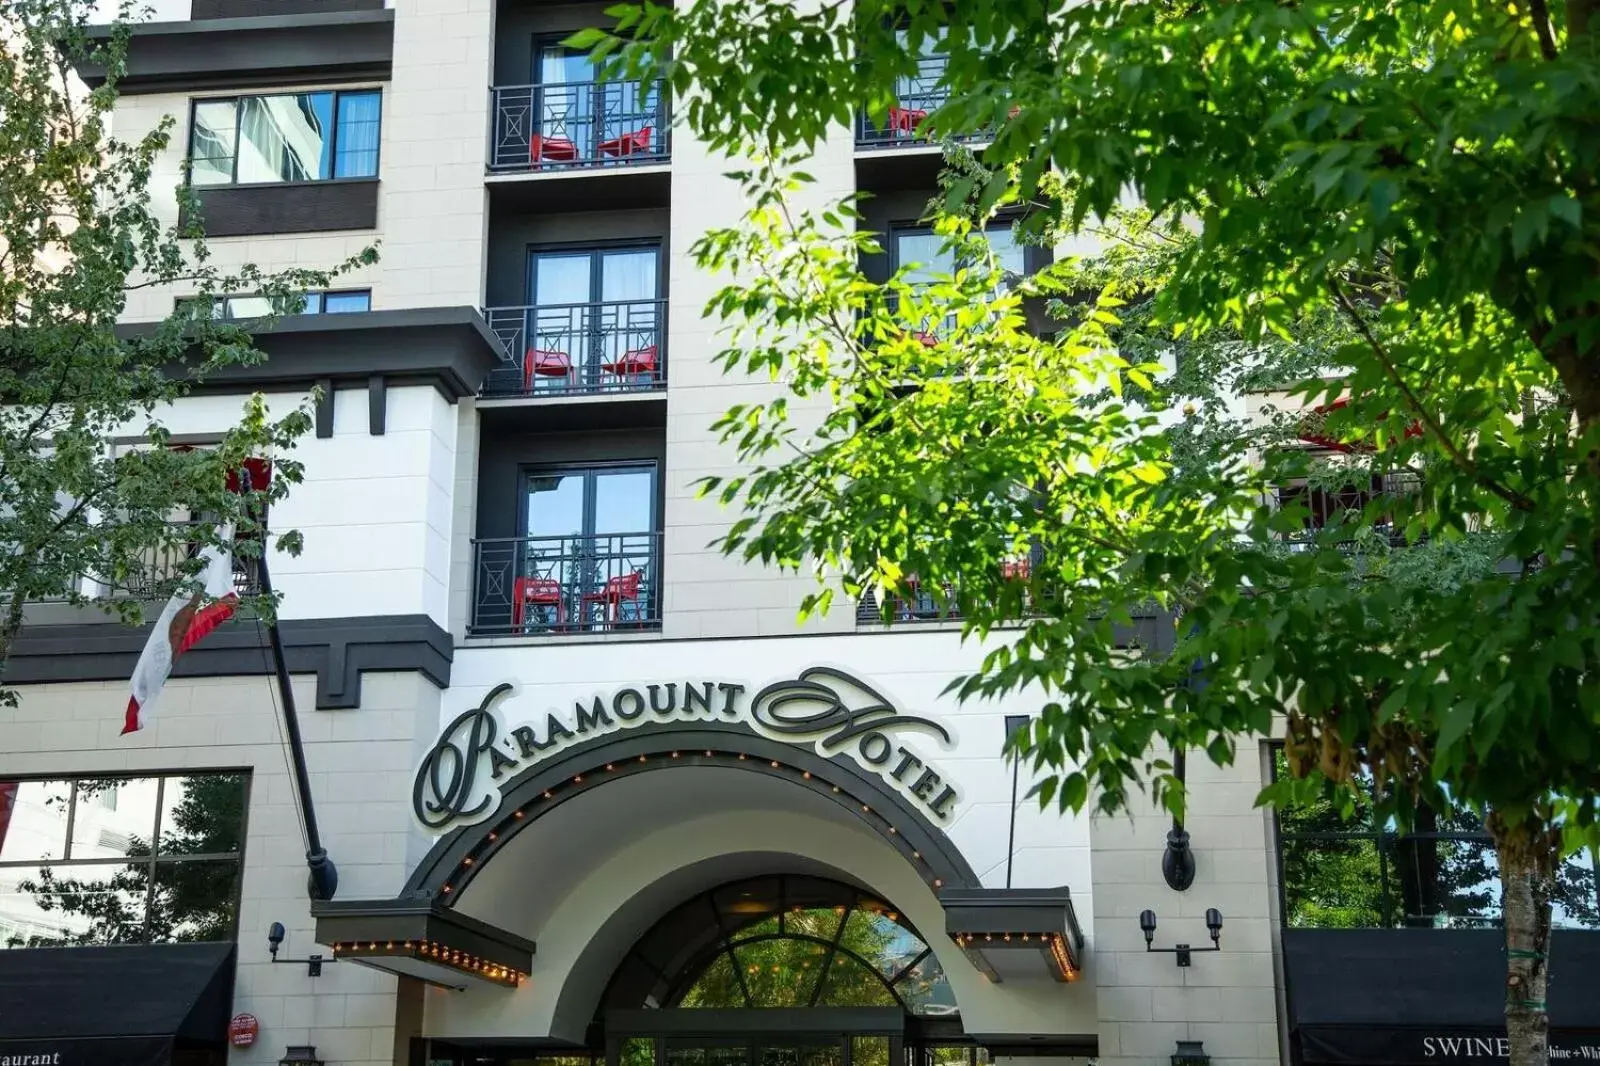 Property Building in The Paramount Hotel Portland